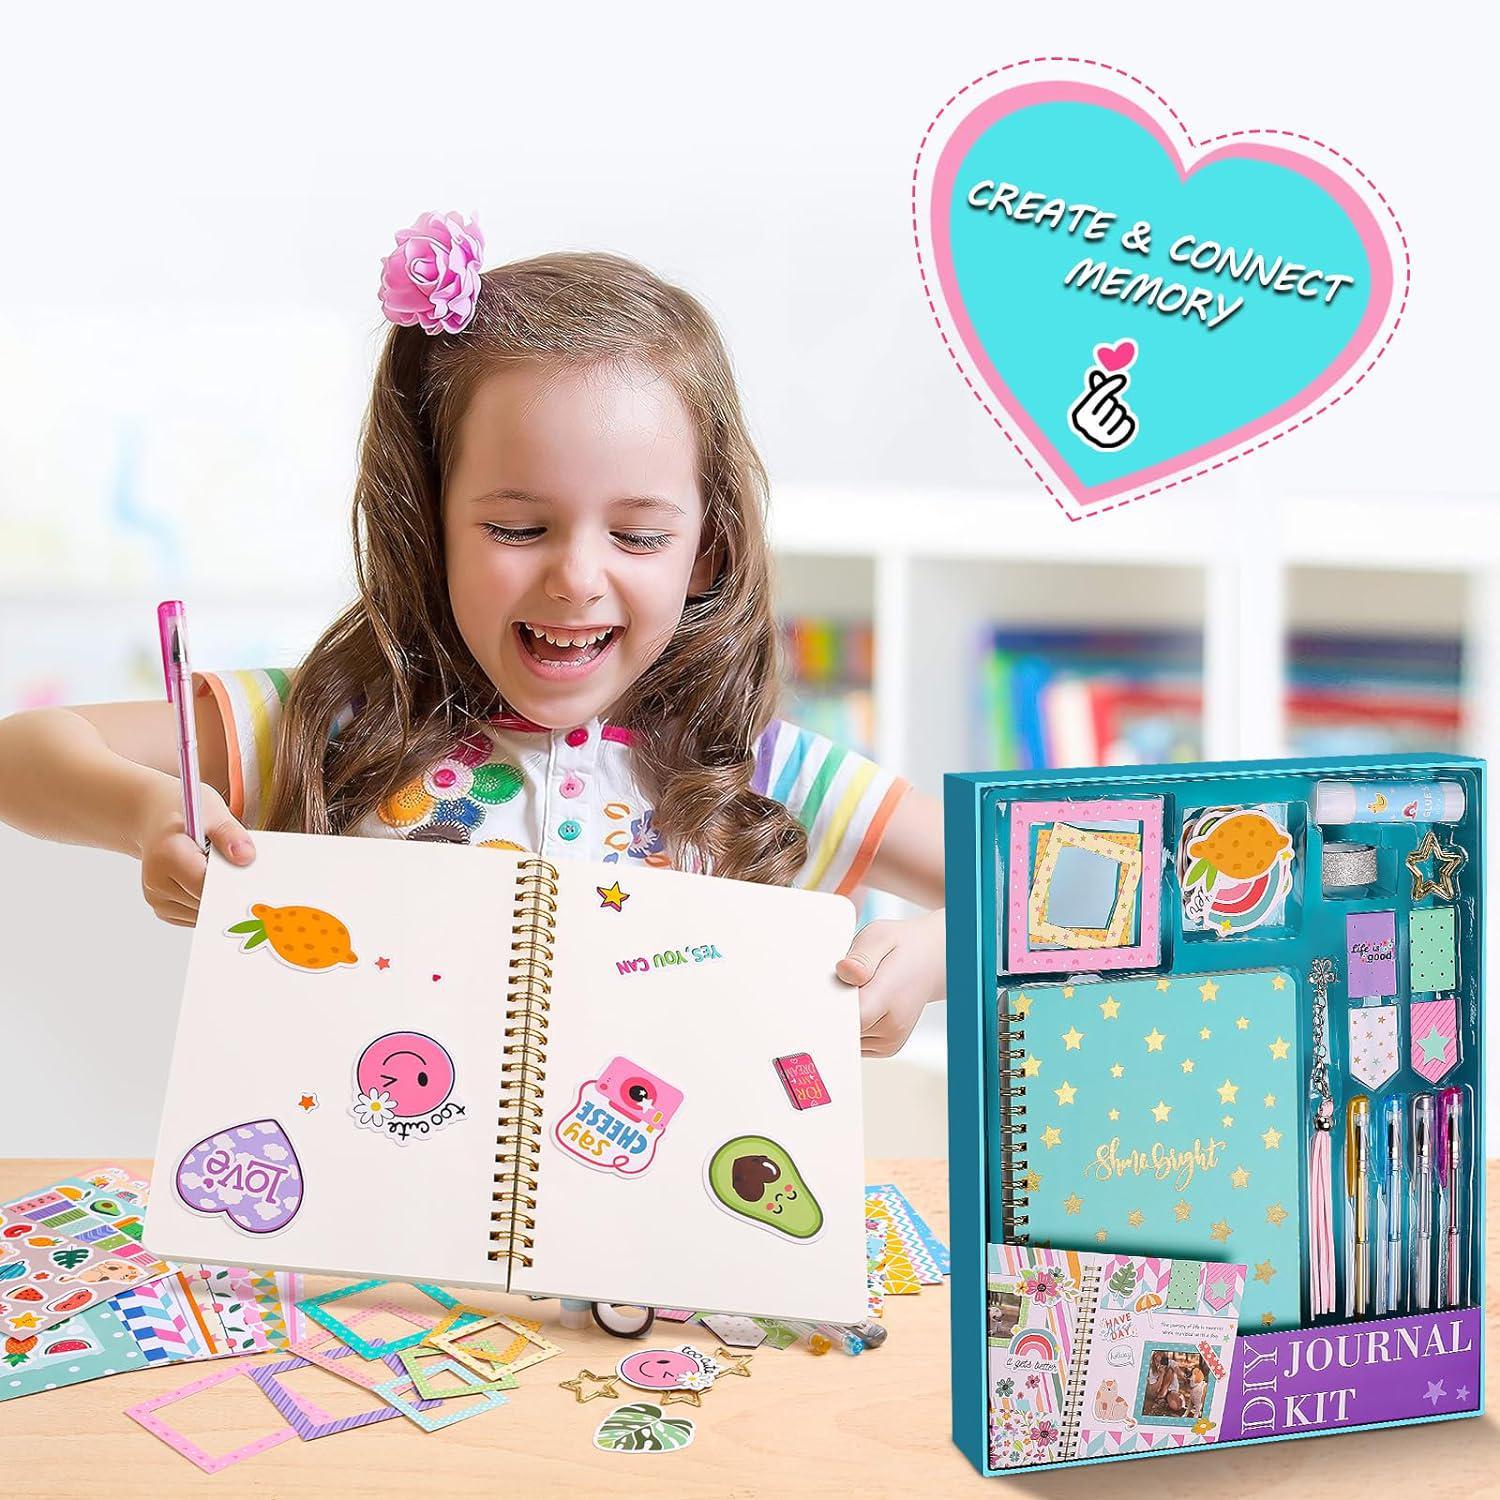 Pretty Me diy journal kit for girls - great gift for 8-14 year old girl -  cool